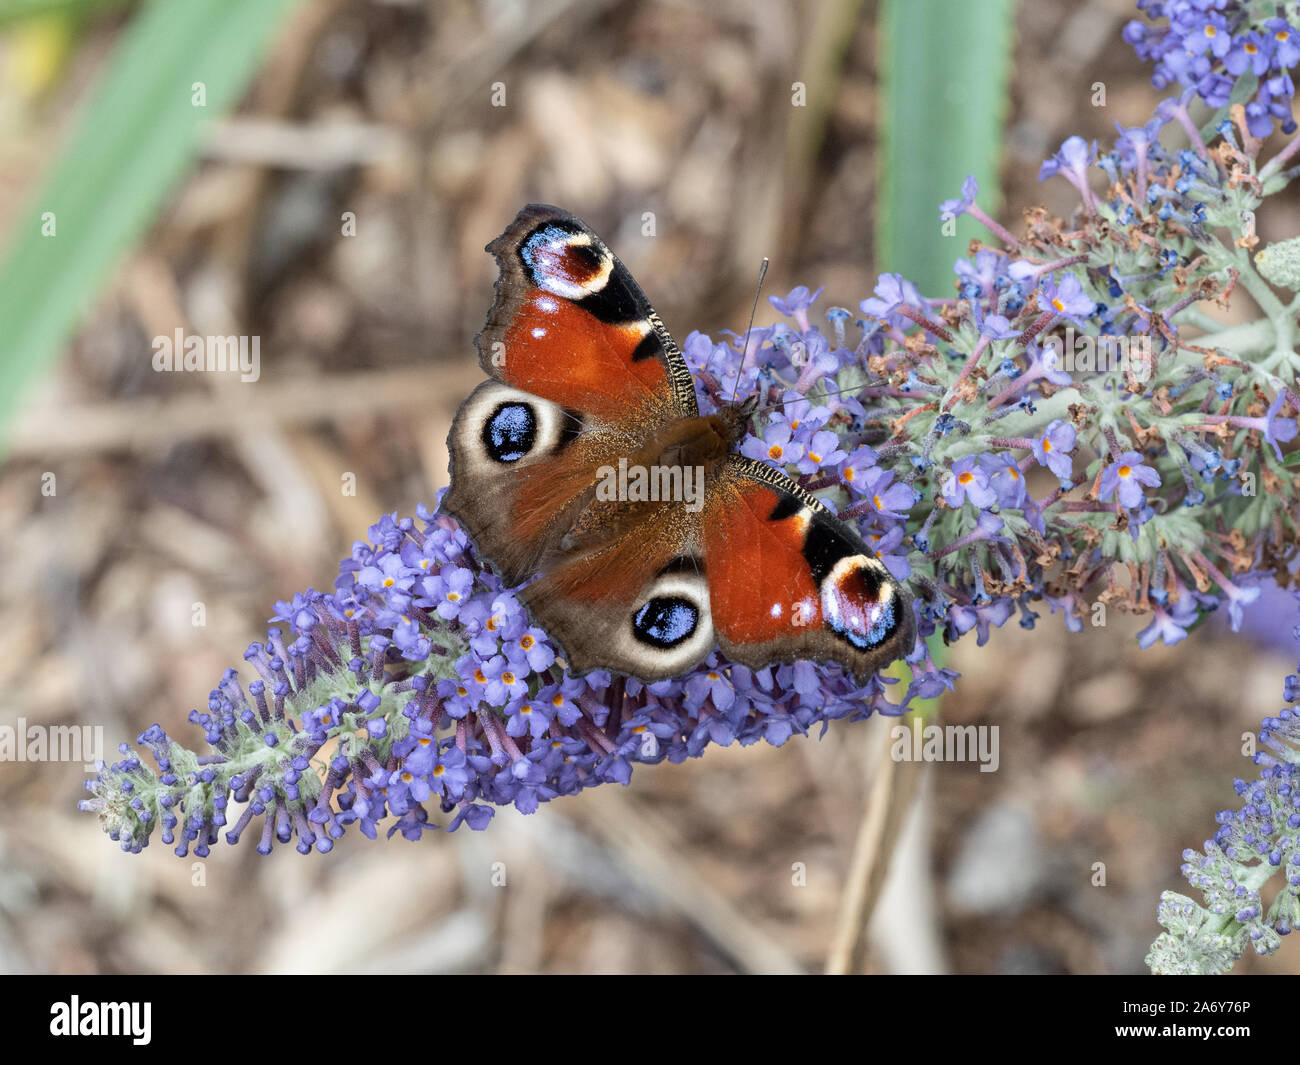 A close up of a peacock butterfly wings open feeding on a Buddleia flower Stock Photo